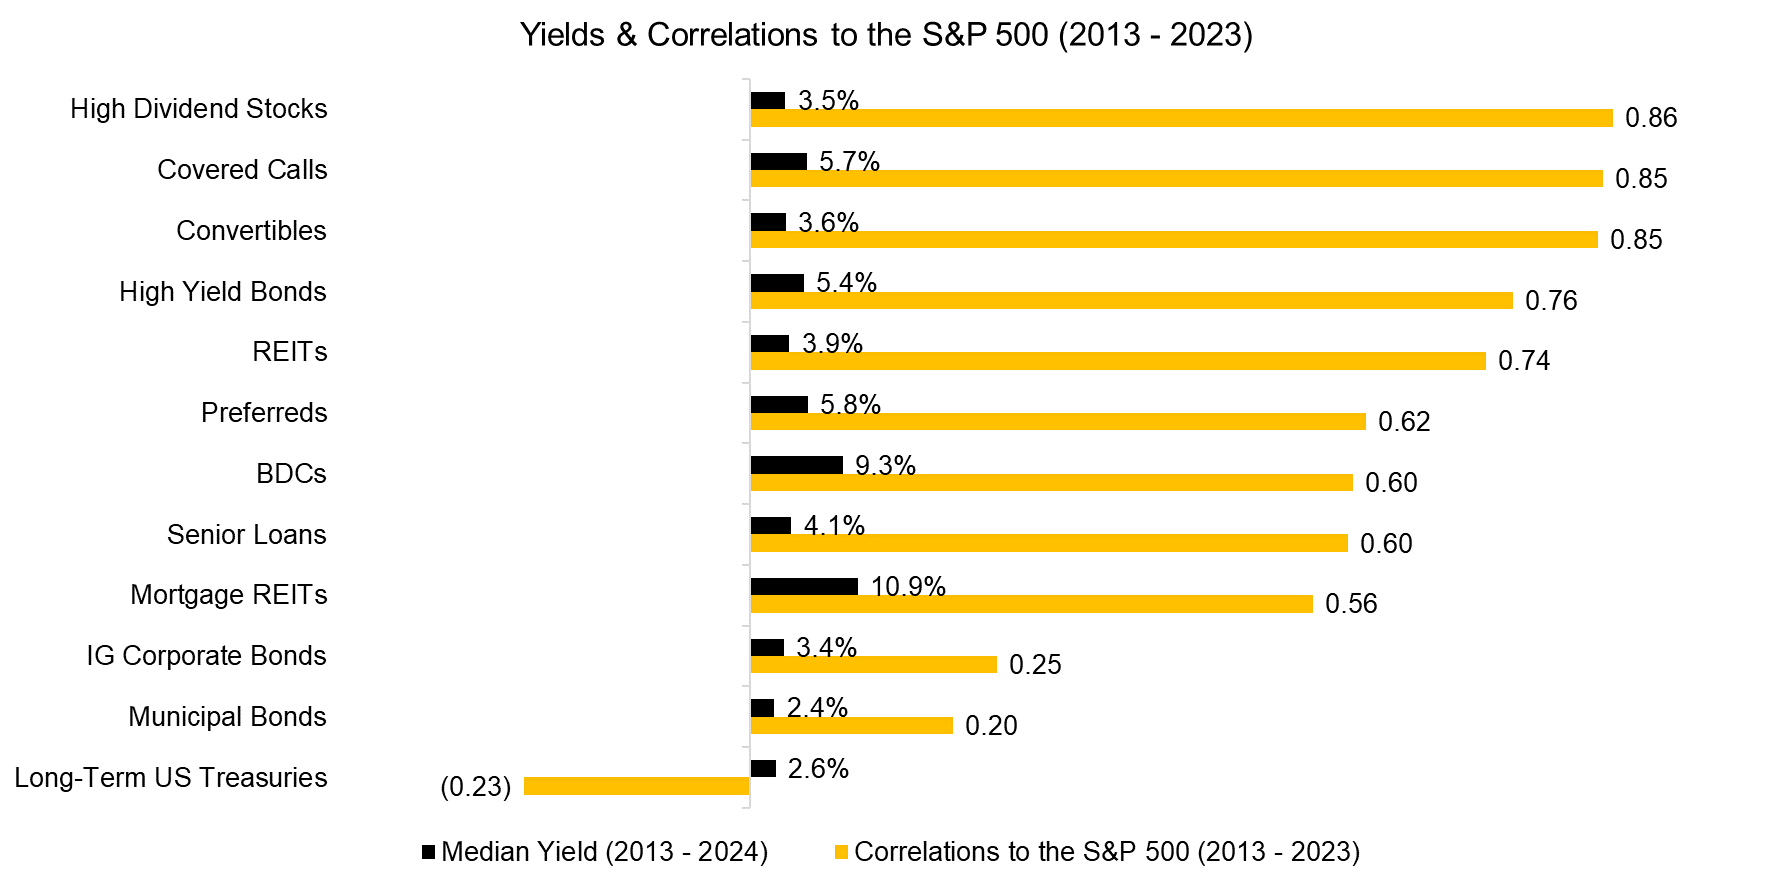 Yields & Correlations to the S&P 500 (2013 - 2023)